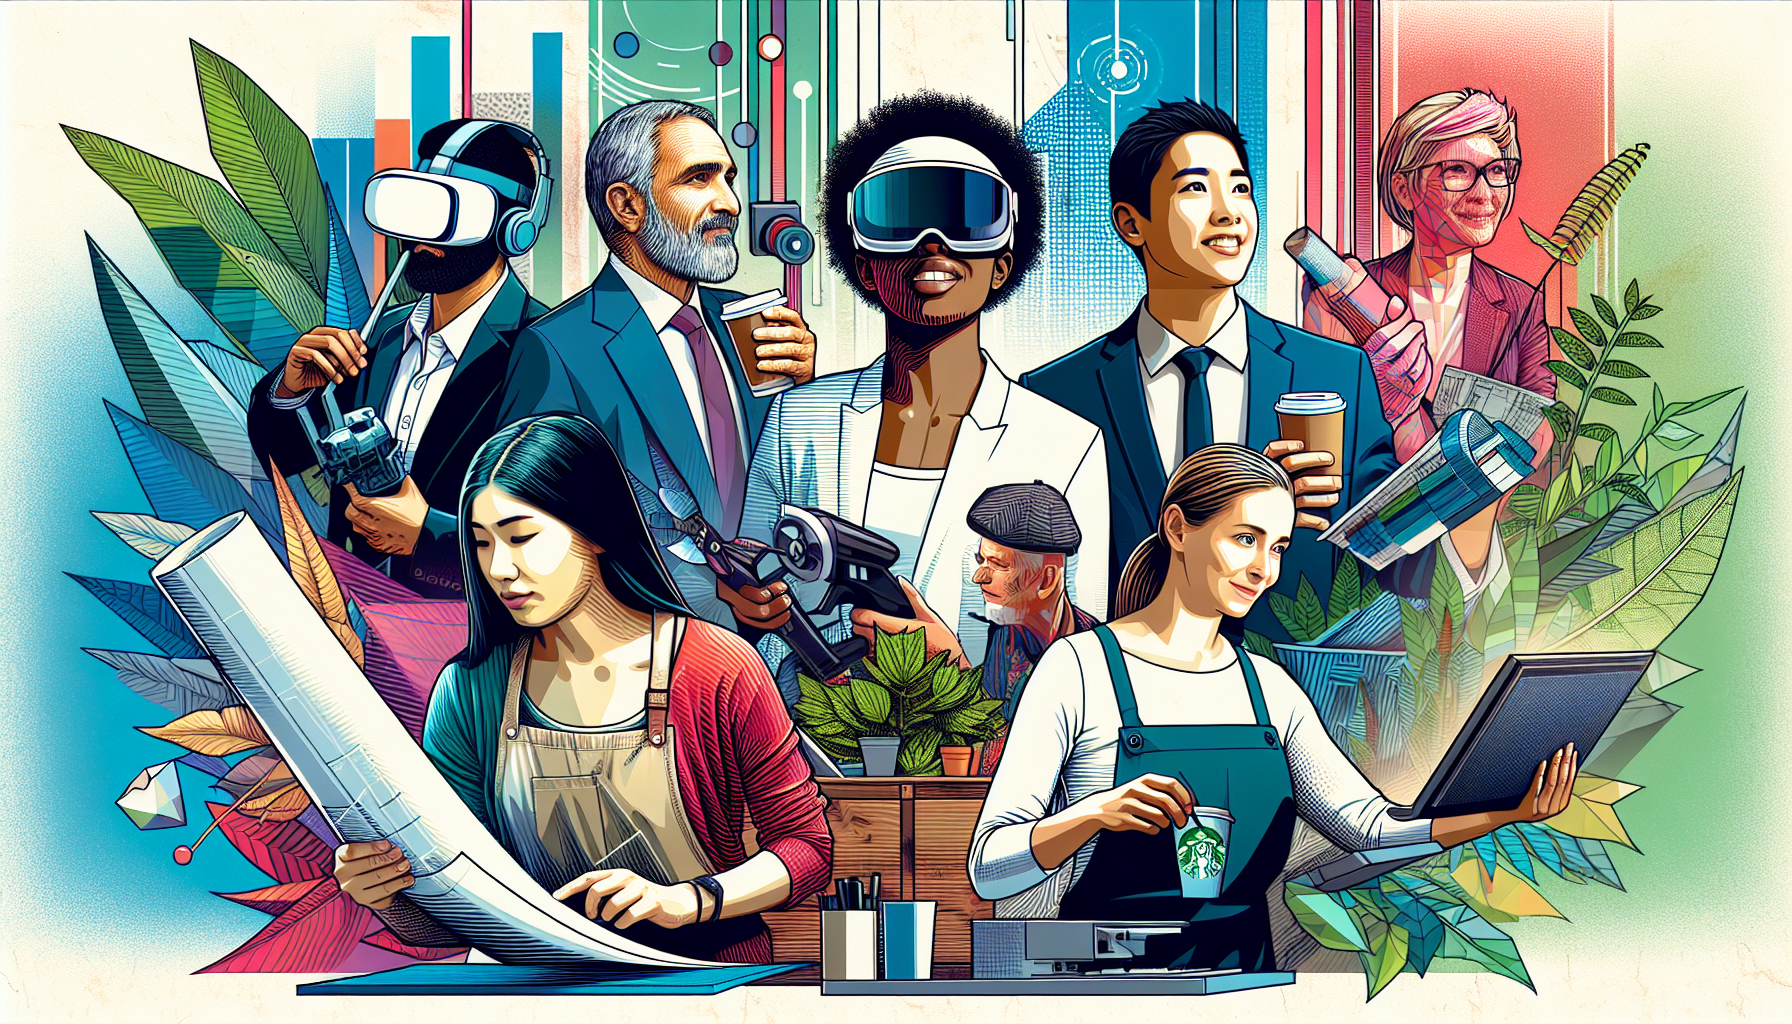 Illustration of employees from various industries